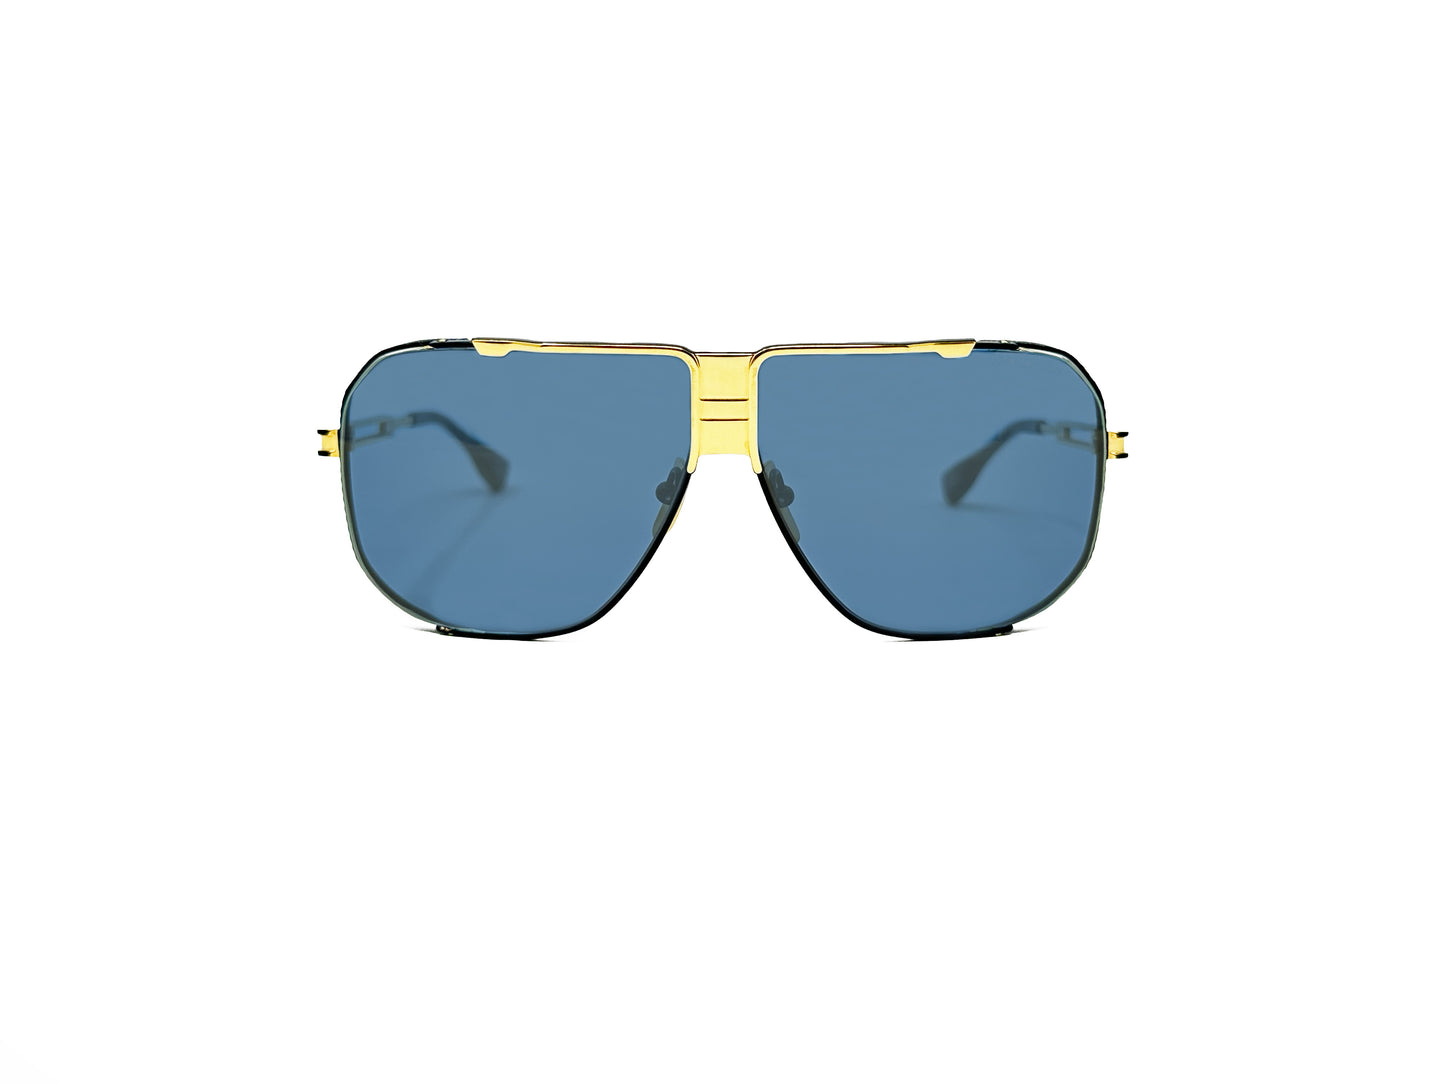 Dita large angled, aviator type sunglass with flat top. Model: Cascais. Color: Gold metal with blue lenses. Front view. 